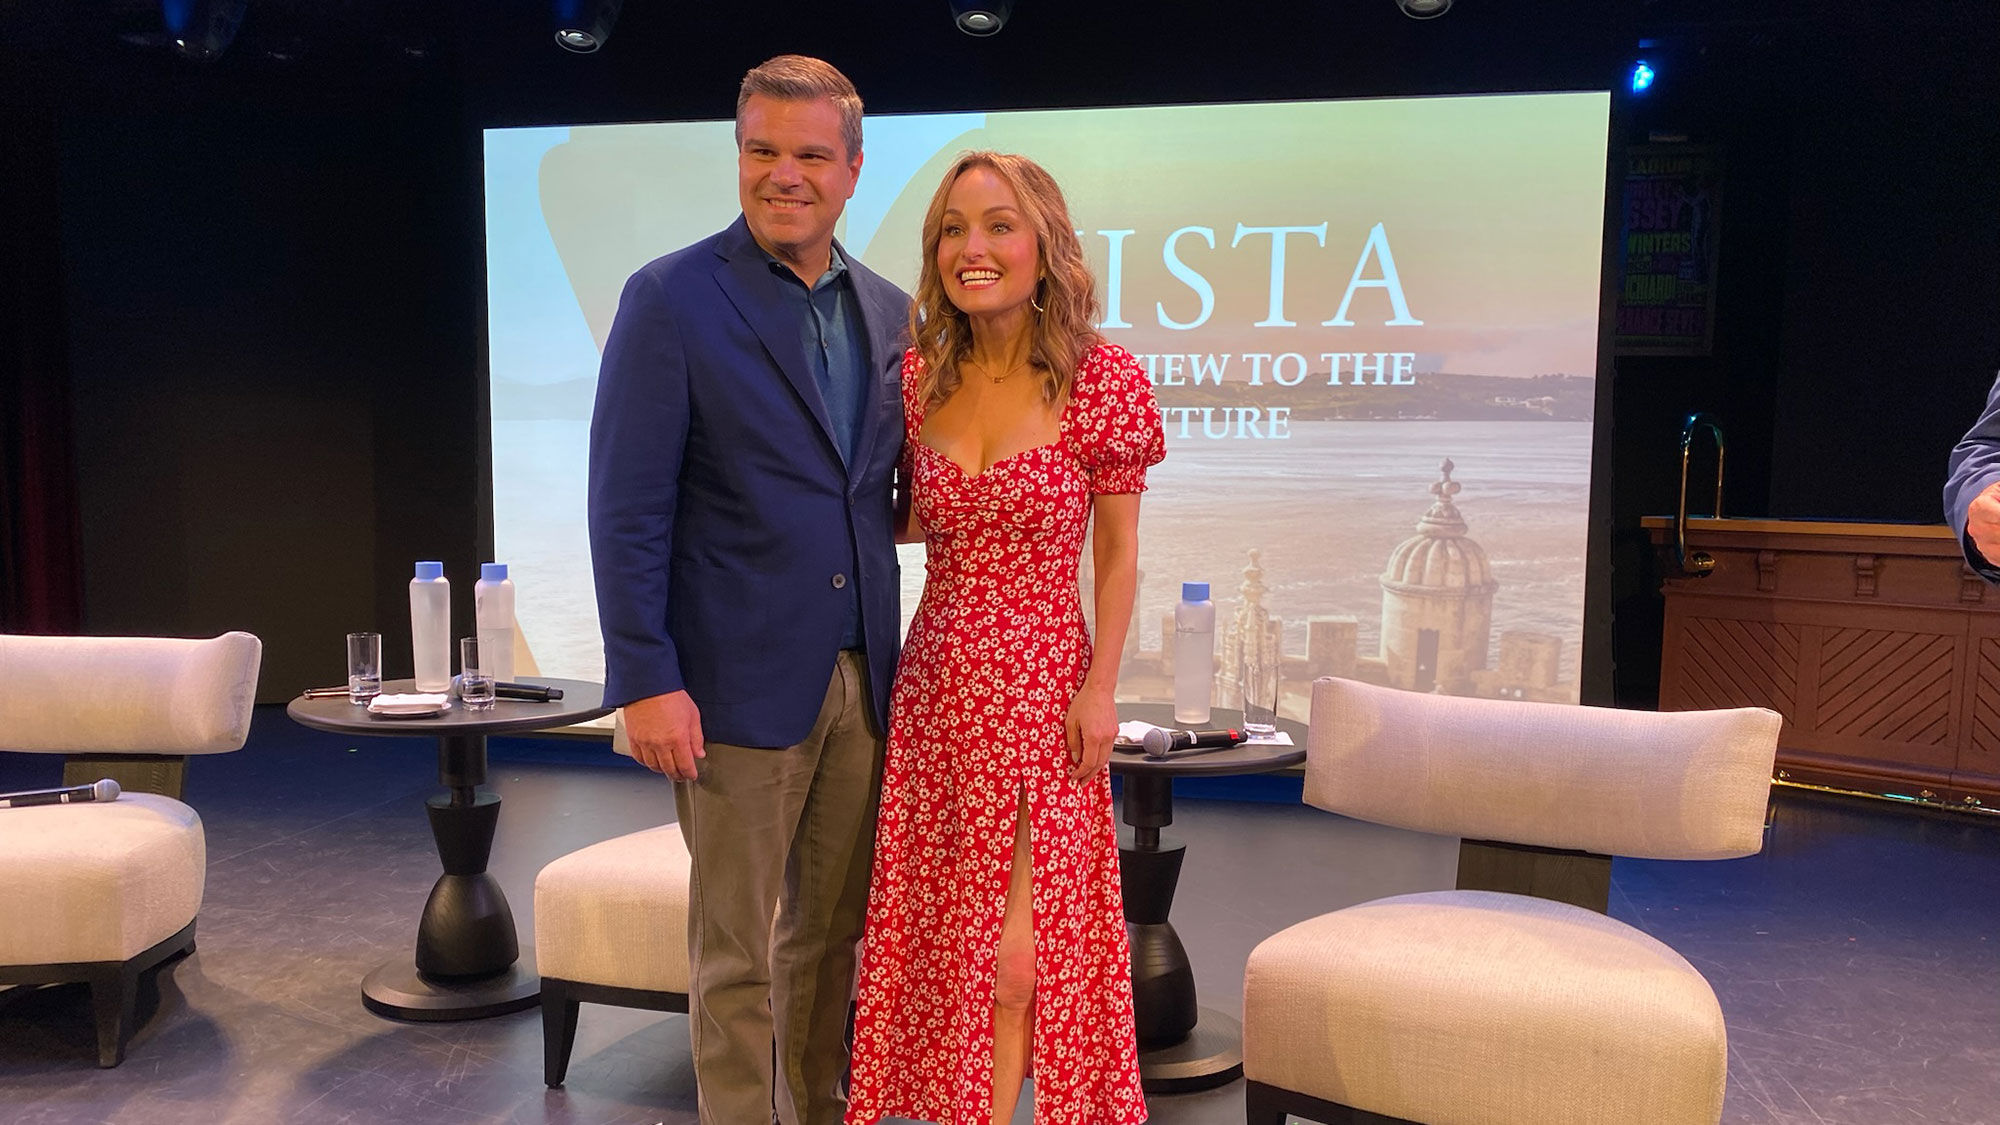 Frank A. Del Rio, president of Oceania, stands with Giada de Laurentis, the godmother of the Oceania Vista during the ship's christening voyage. Laurentis is a chef, restaurateur and Emmy-winning food personality.